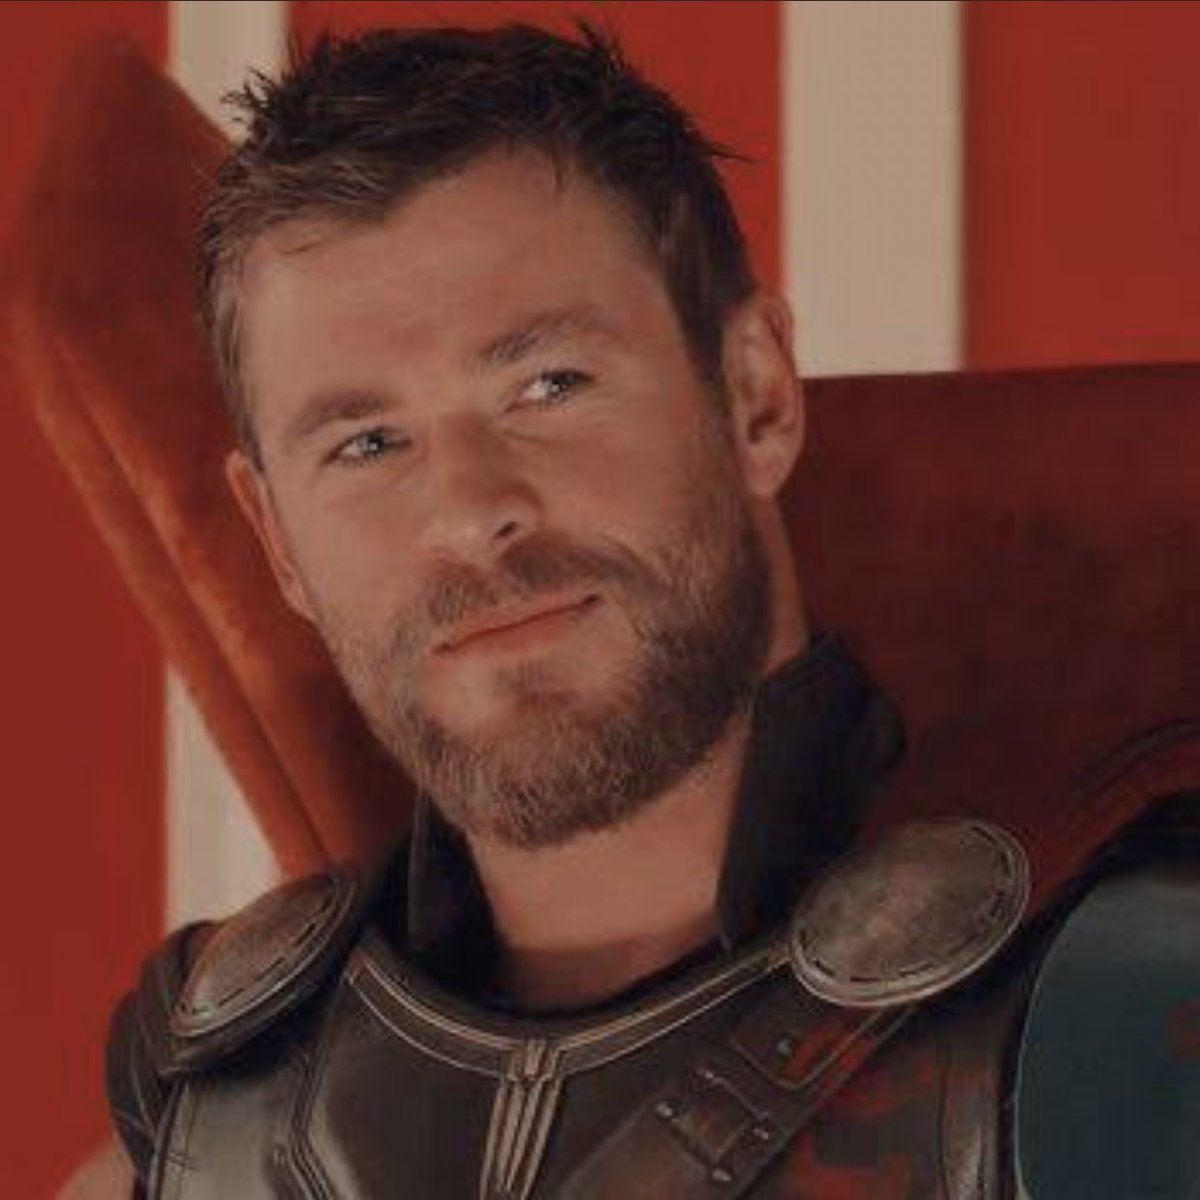 RT @yourfavspan: Thor from the mcu is pansexual! https://t.co/cvZ0XWsT5G